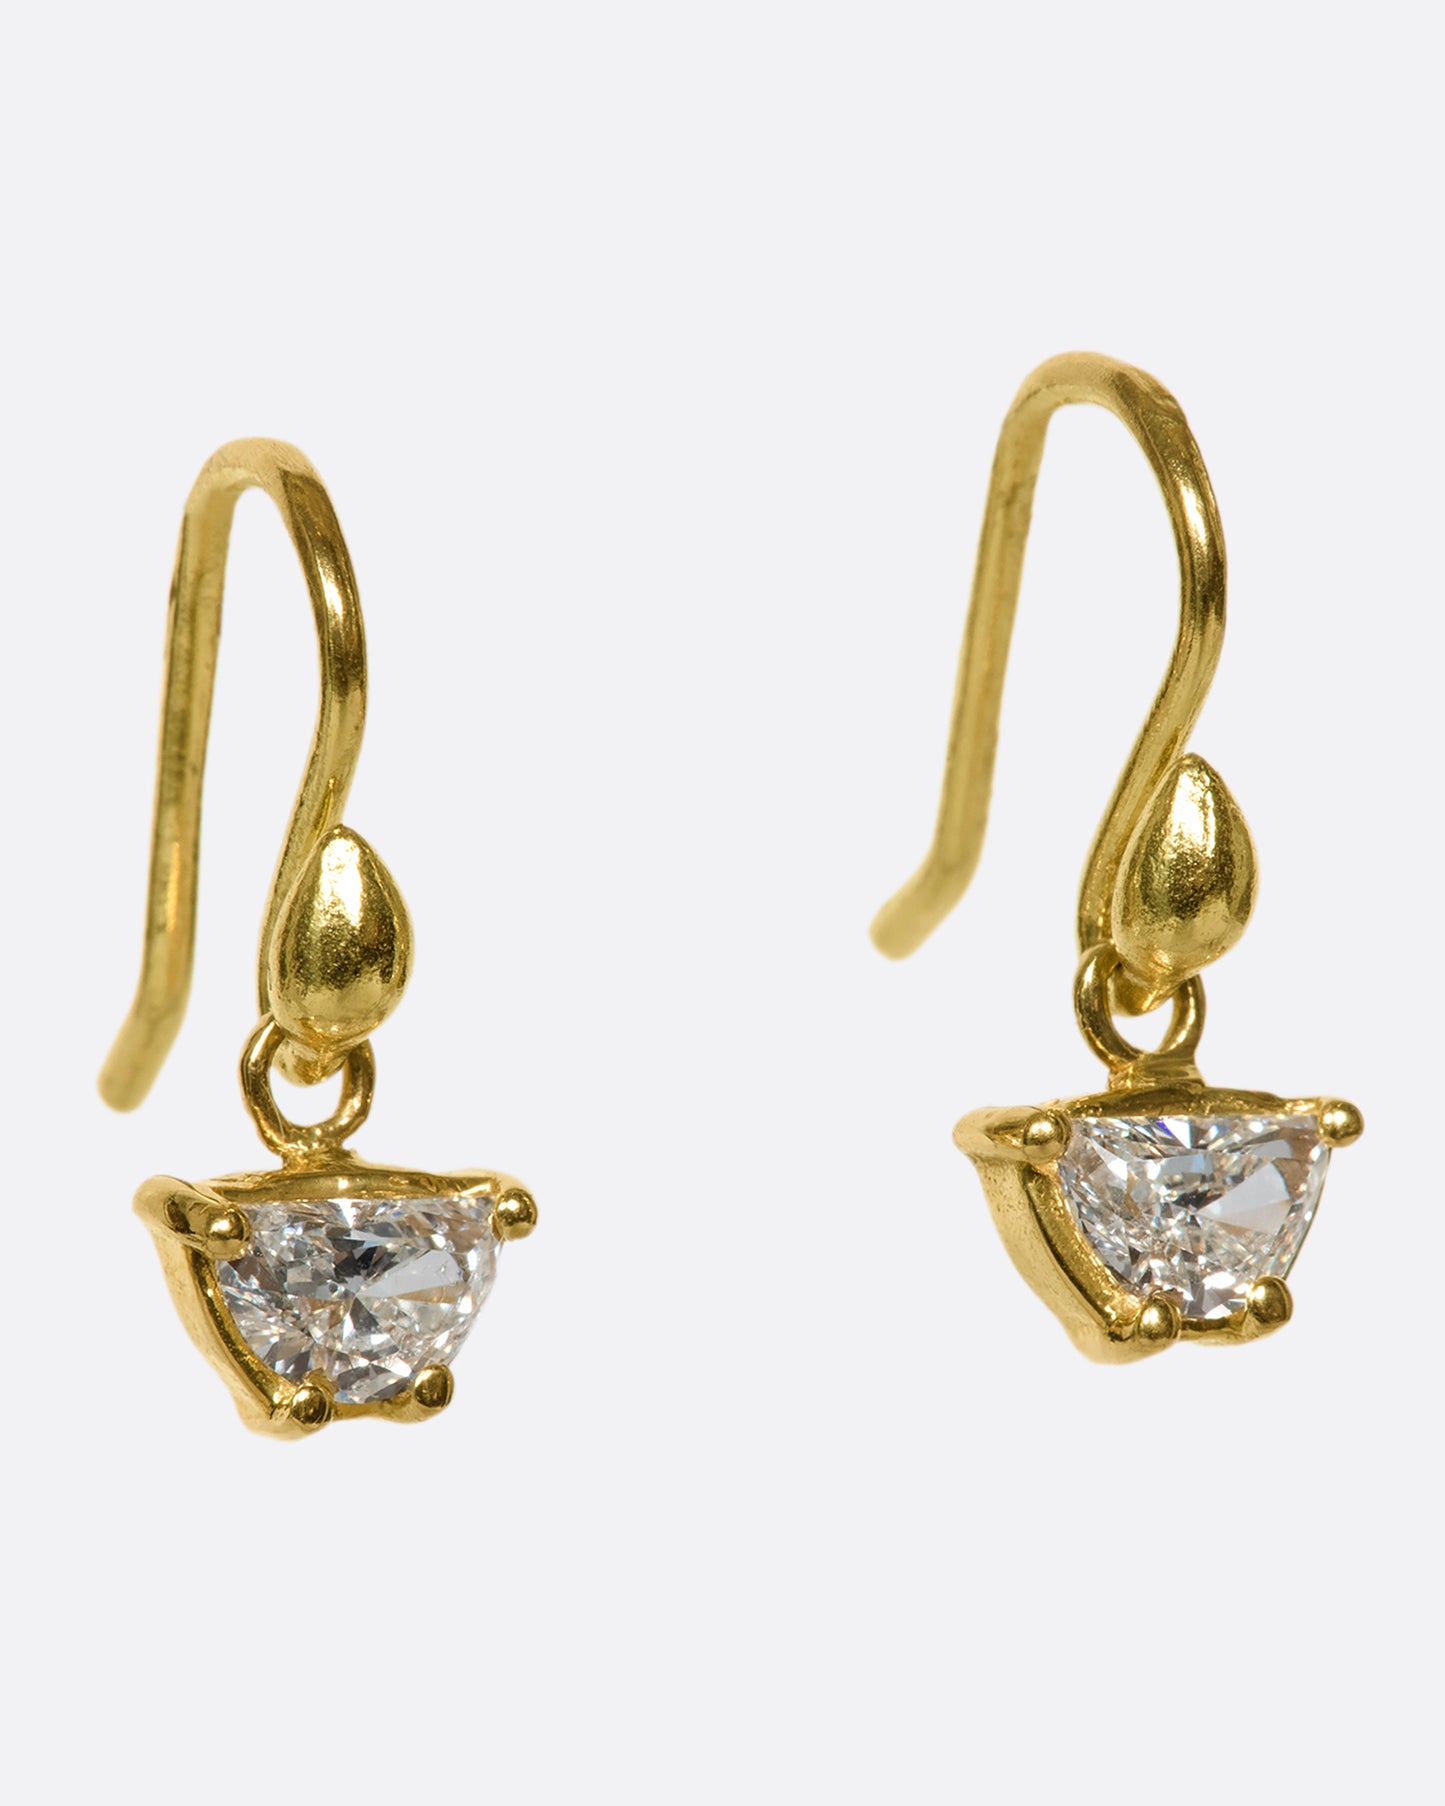 A unique pair of trapezoid-shaped diamond drops set in 18k gold